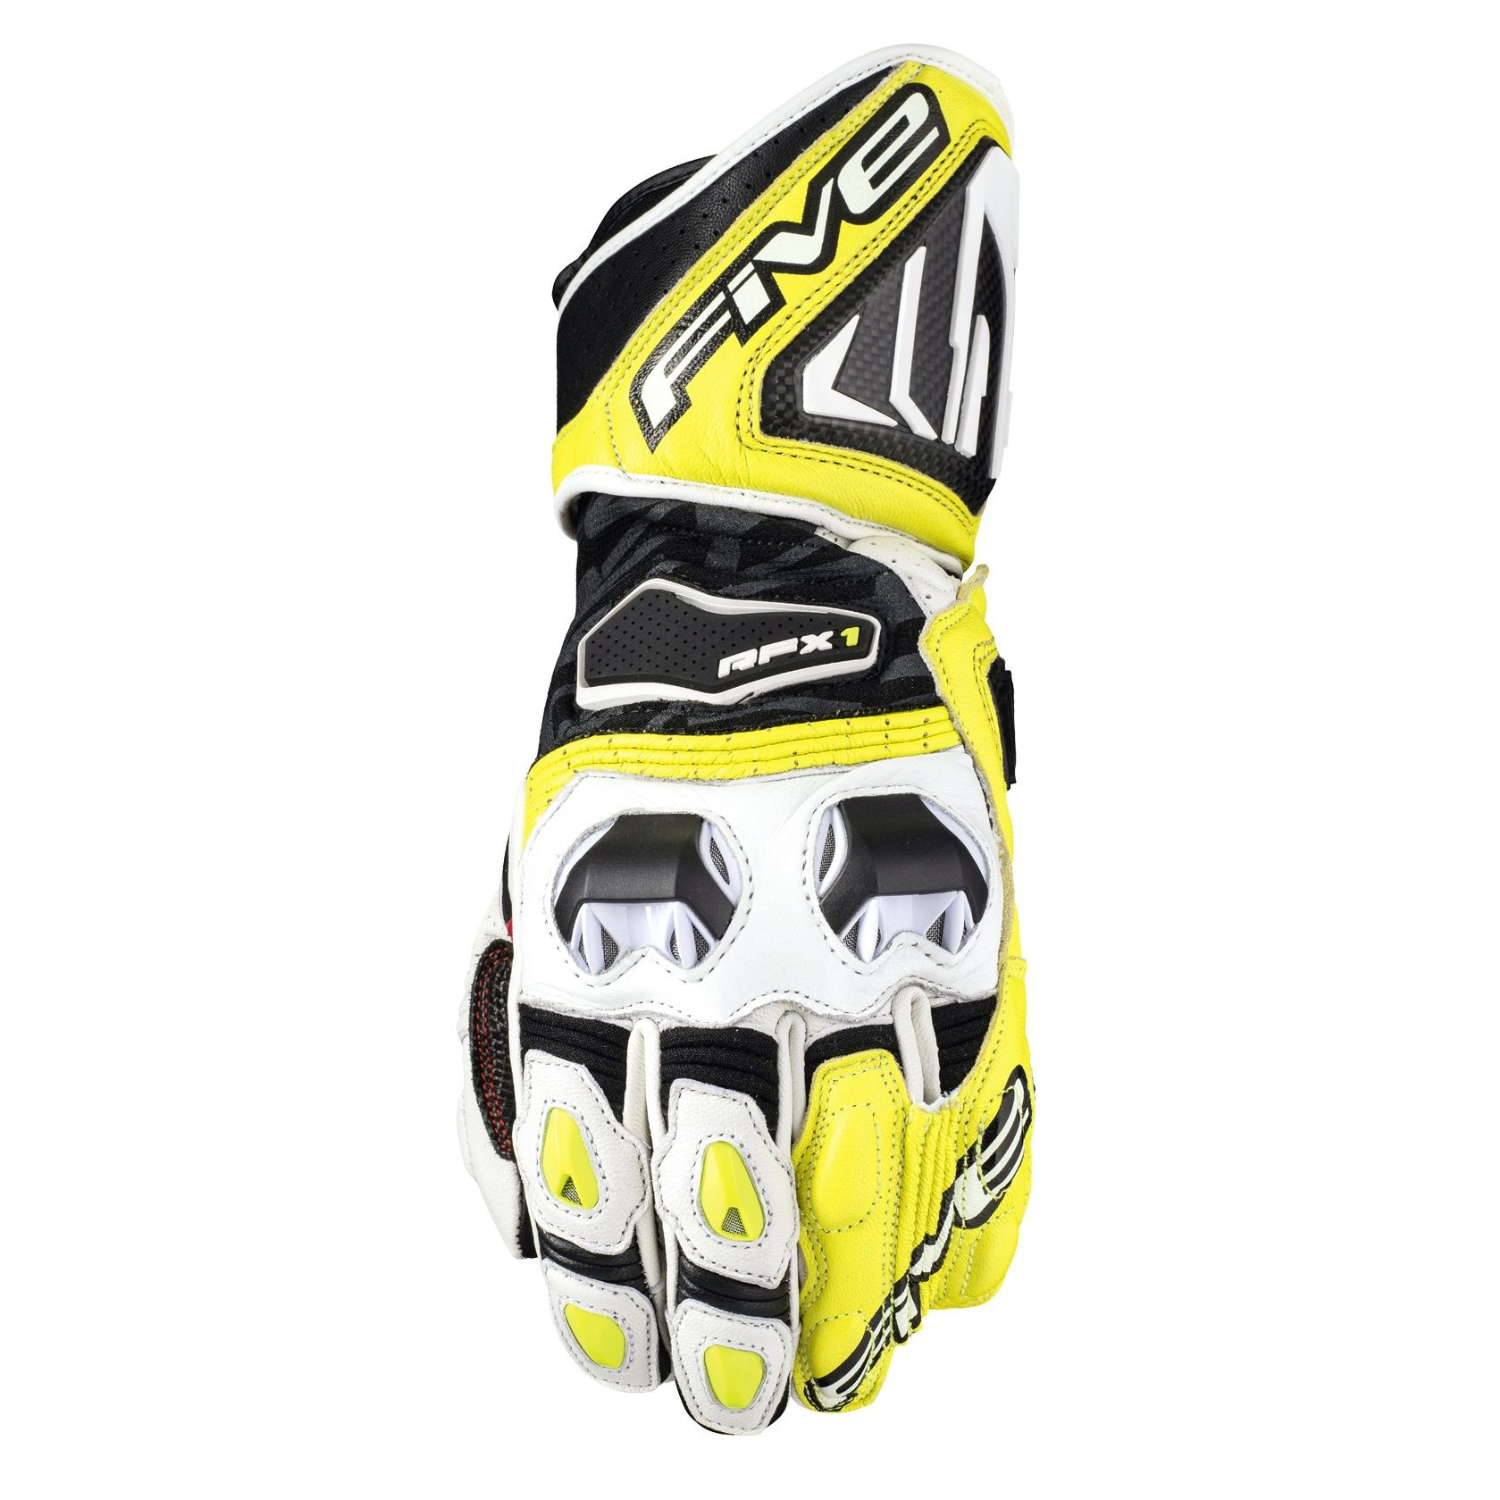 Image of Five RFX1 Gloves White Yellow Size L ID 3882020012730